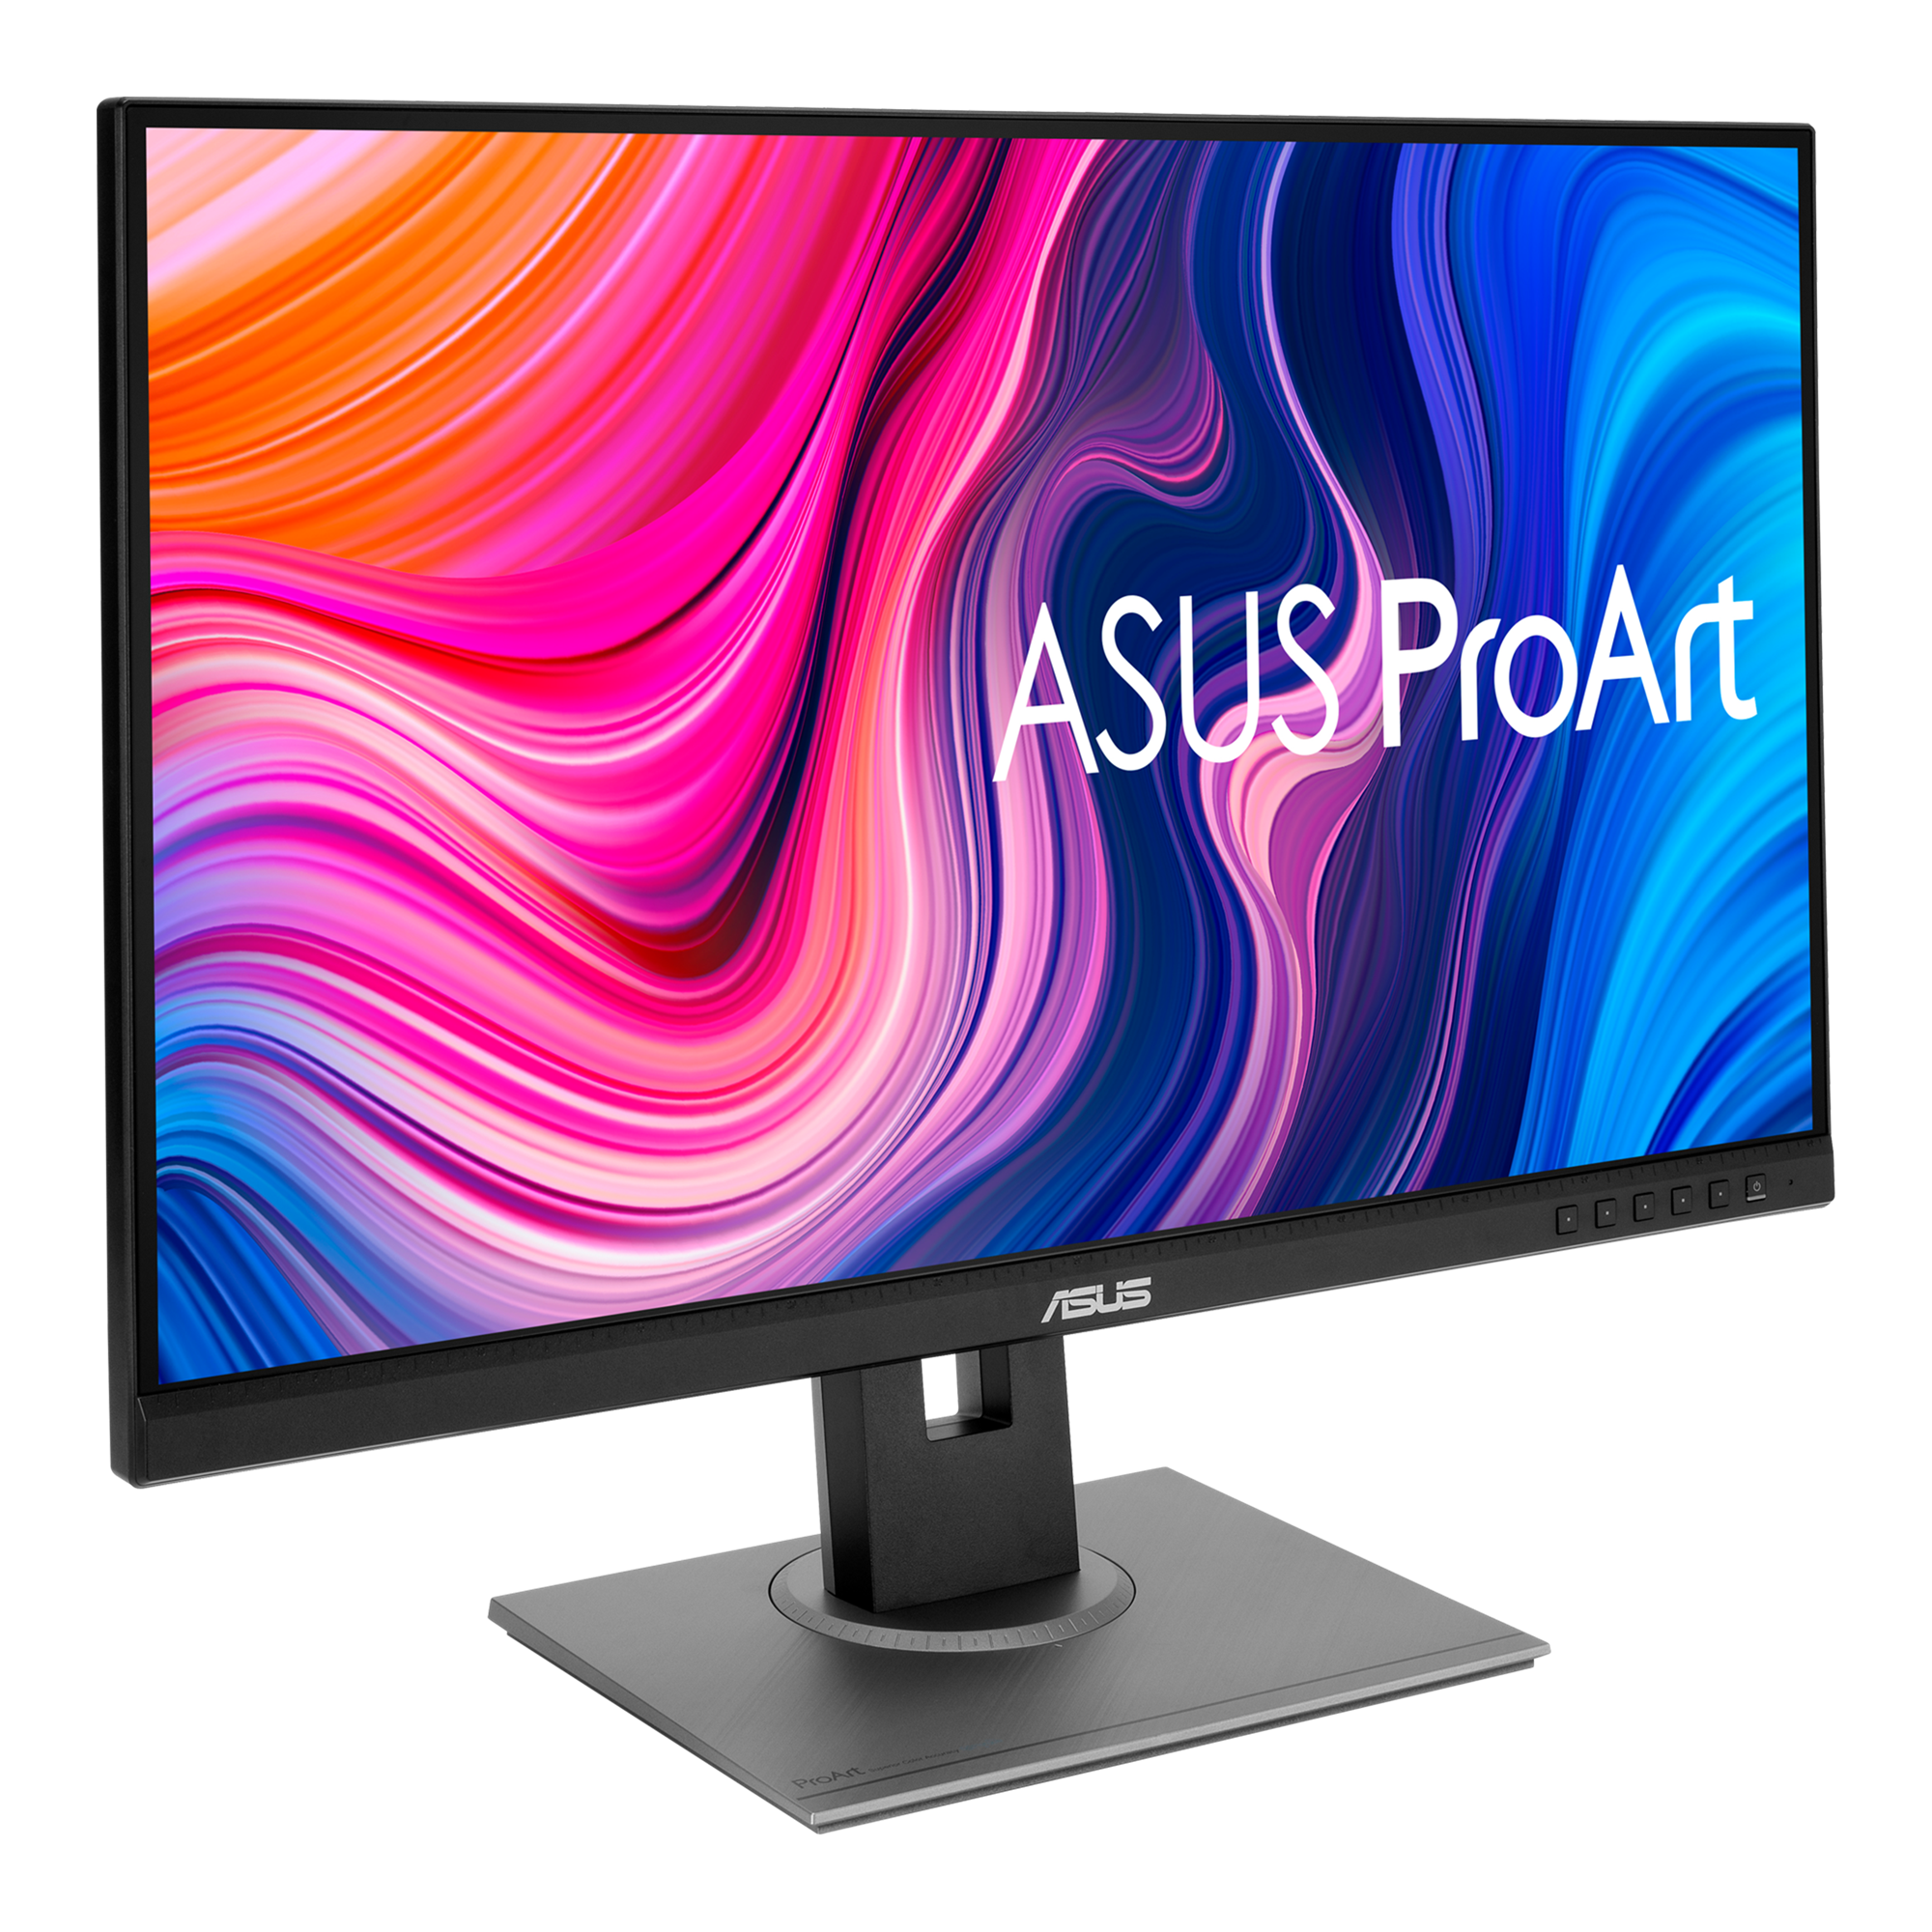 ASUS ProArt Display PA278QV Review